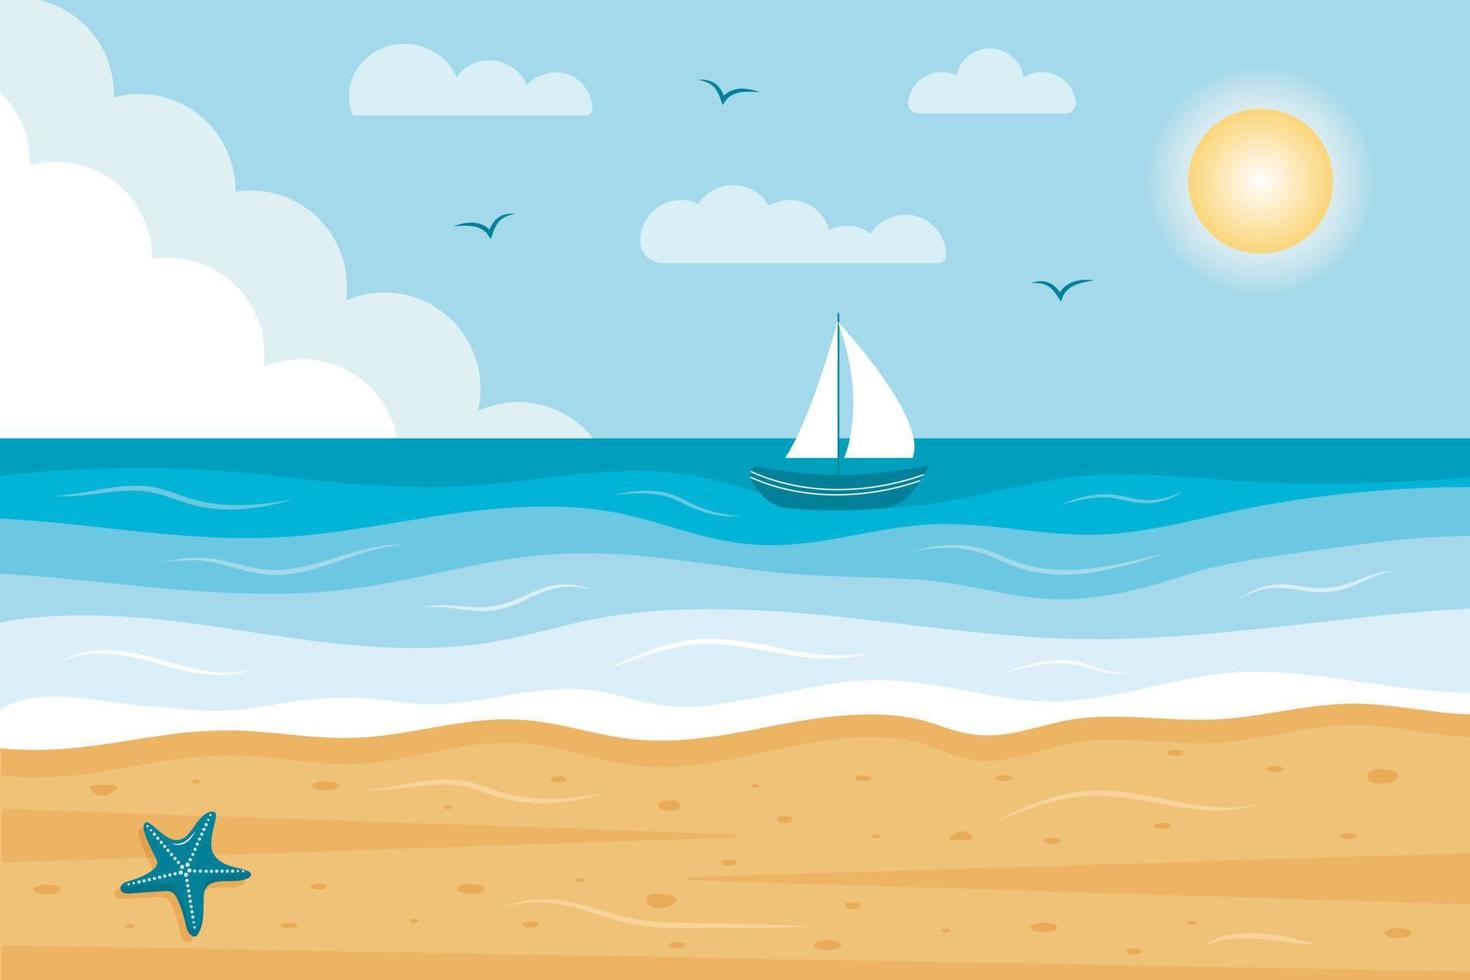 Seascape panorama with sailboat. Tropical beach with starfish. Paradise nature vacation, ocean or sea seashore. vector